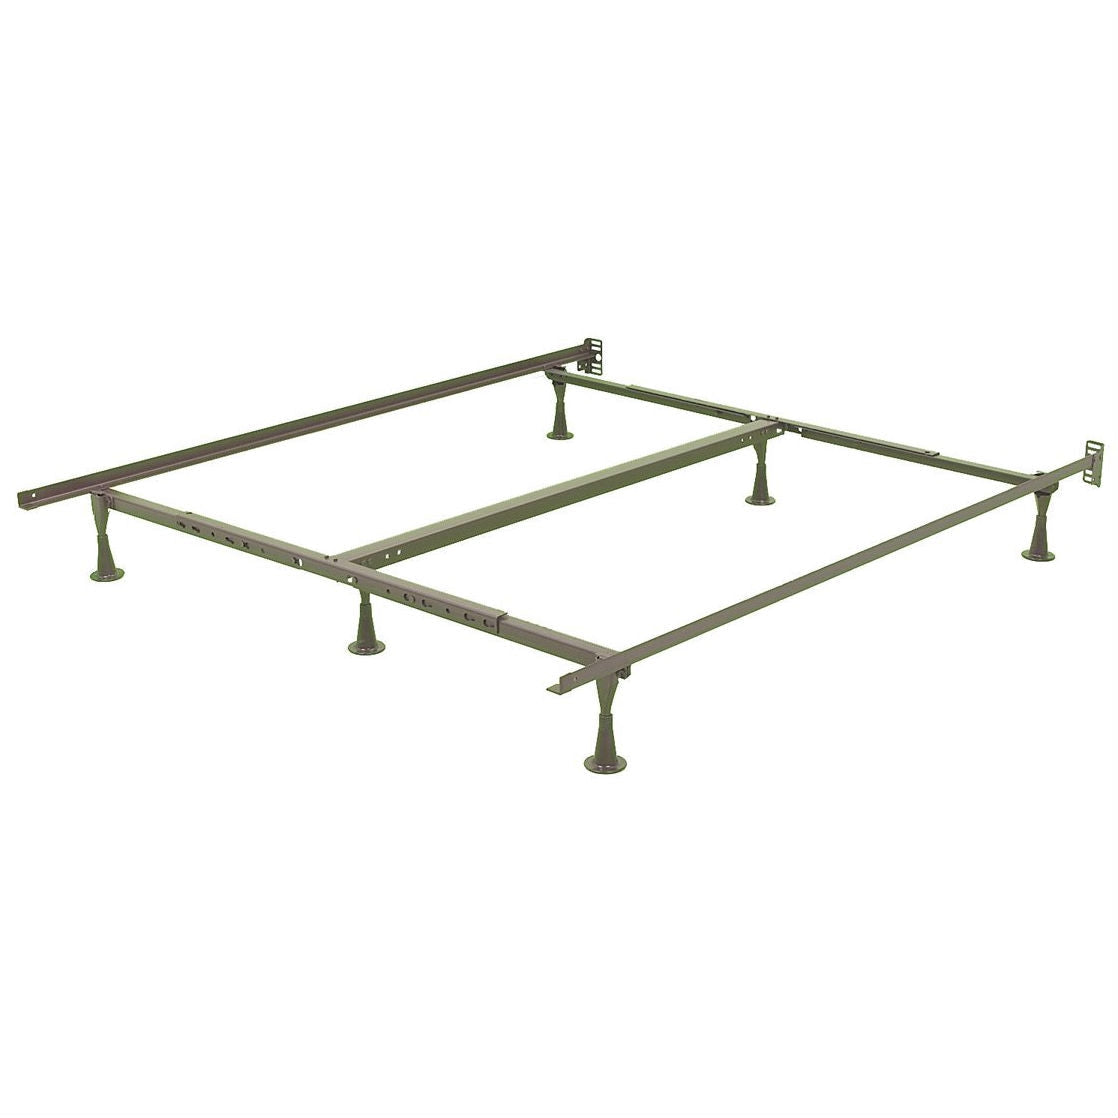 Bedroom > Bed Frames > Metal Beds - California King Metal Bed Frame With Wide Glide Legs And Headboard Brackets